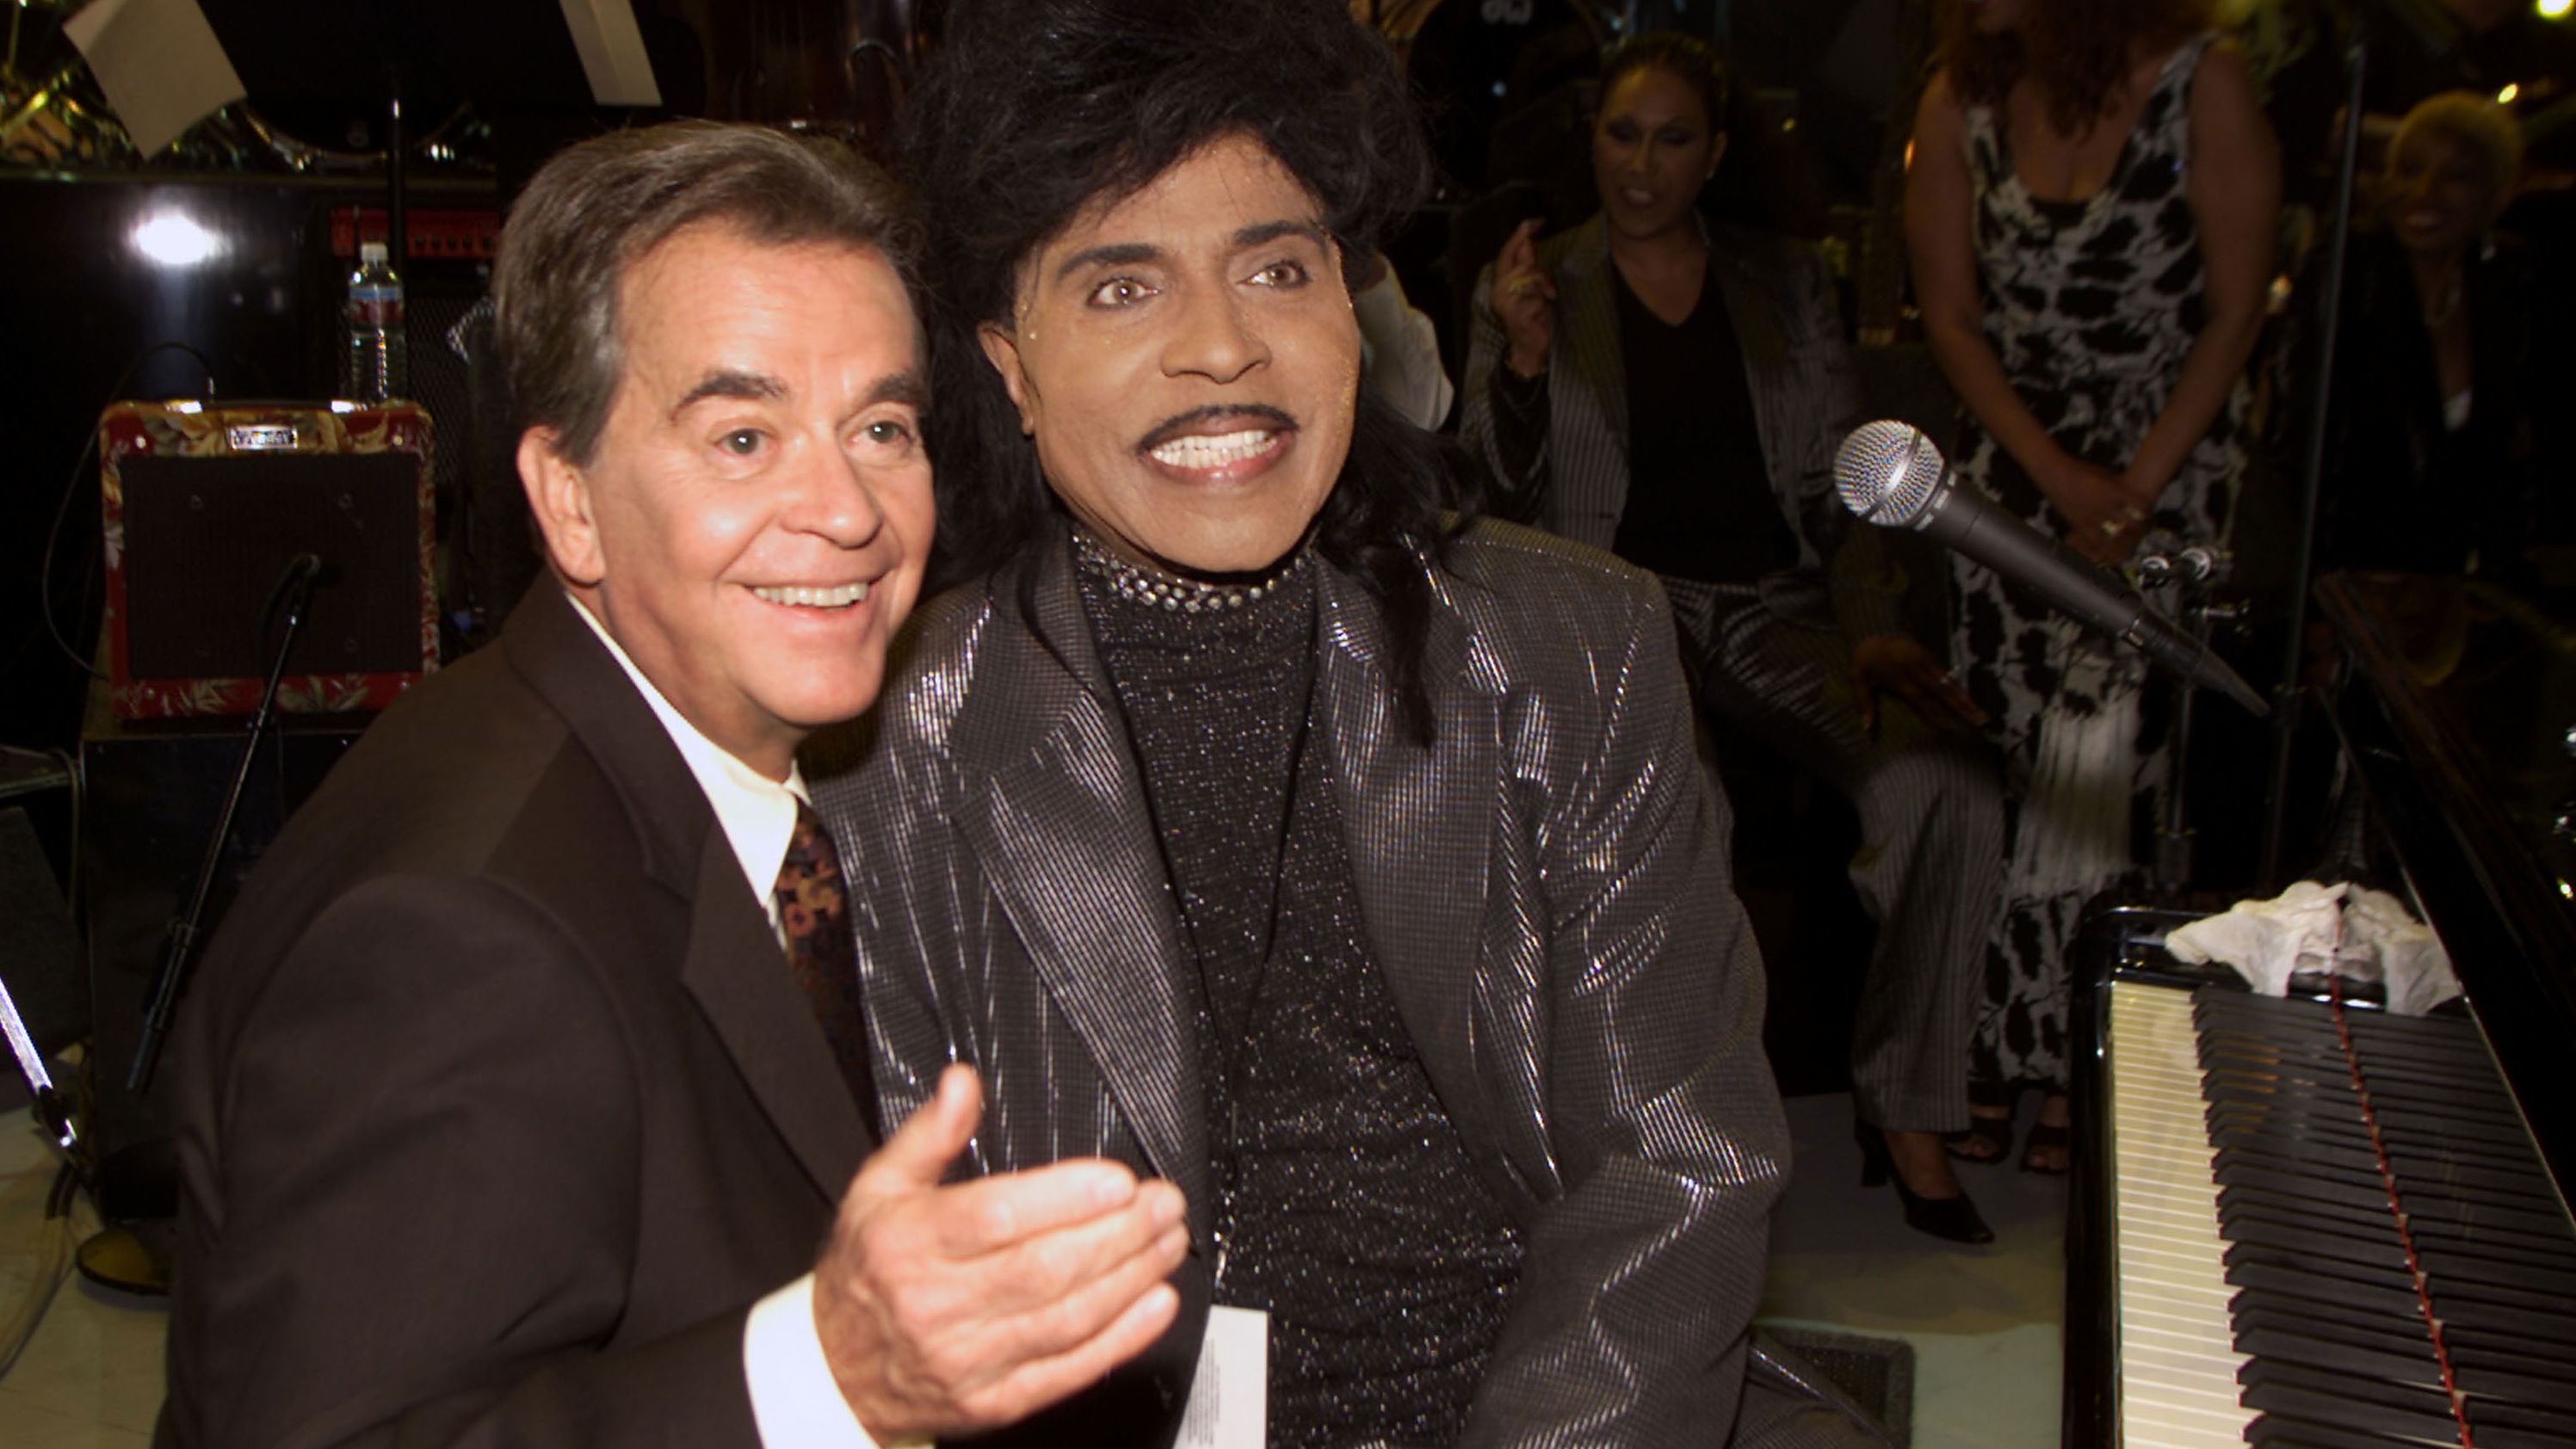 Dick Clark and Little Richard pose together at the taping of "American Bandstand's 50th ... A Celebration" in 2002.